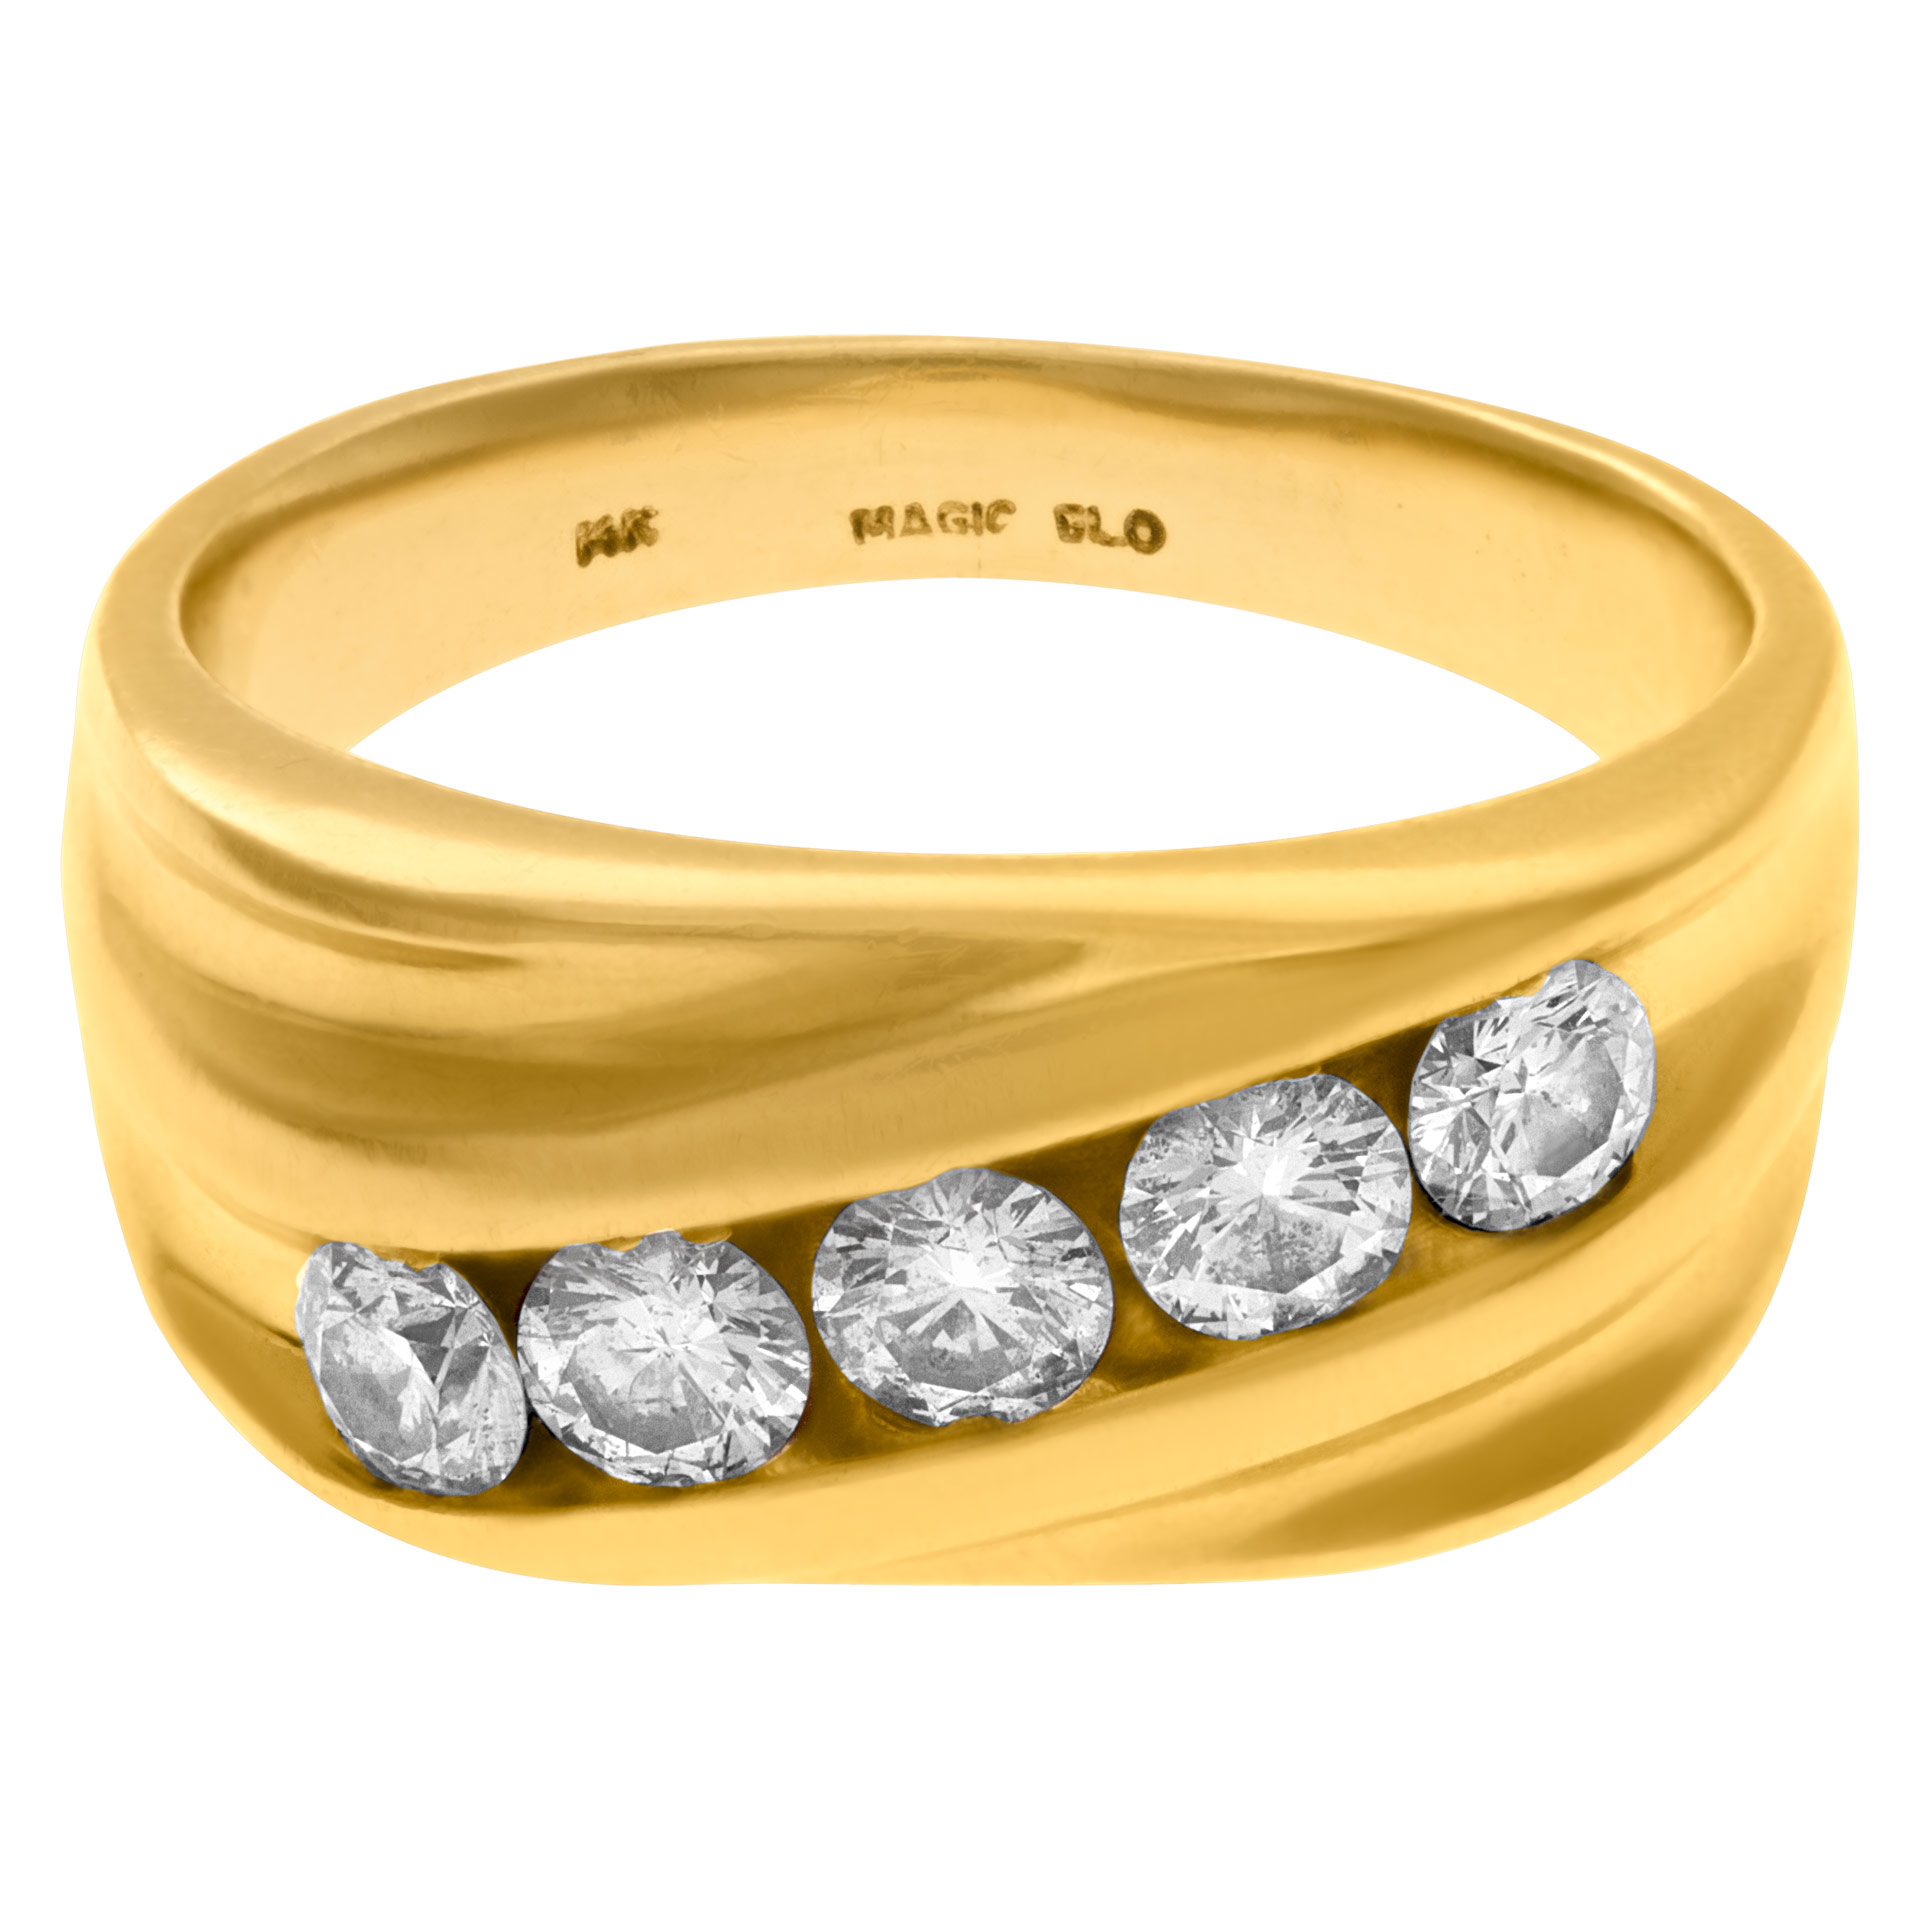 Striking diamond band in 14k yellow gold with 5 diamonds approximately 1.25 carats image 1